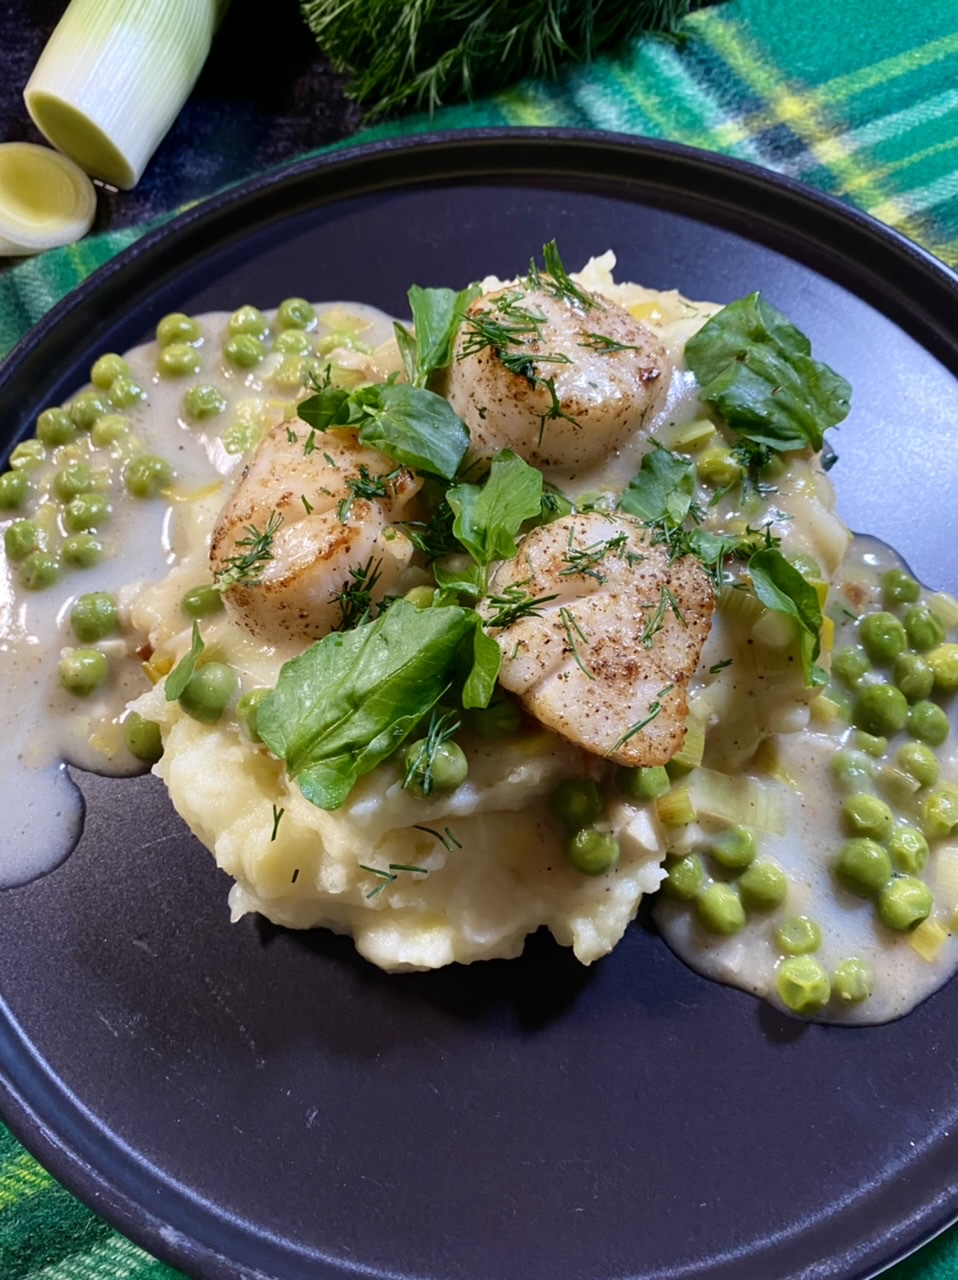 D97DF509 0B3B 49F2 A01D 93BA8A18465C - Irish Scallops with Leeks and Peas over Mashed Potatoes